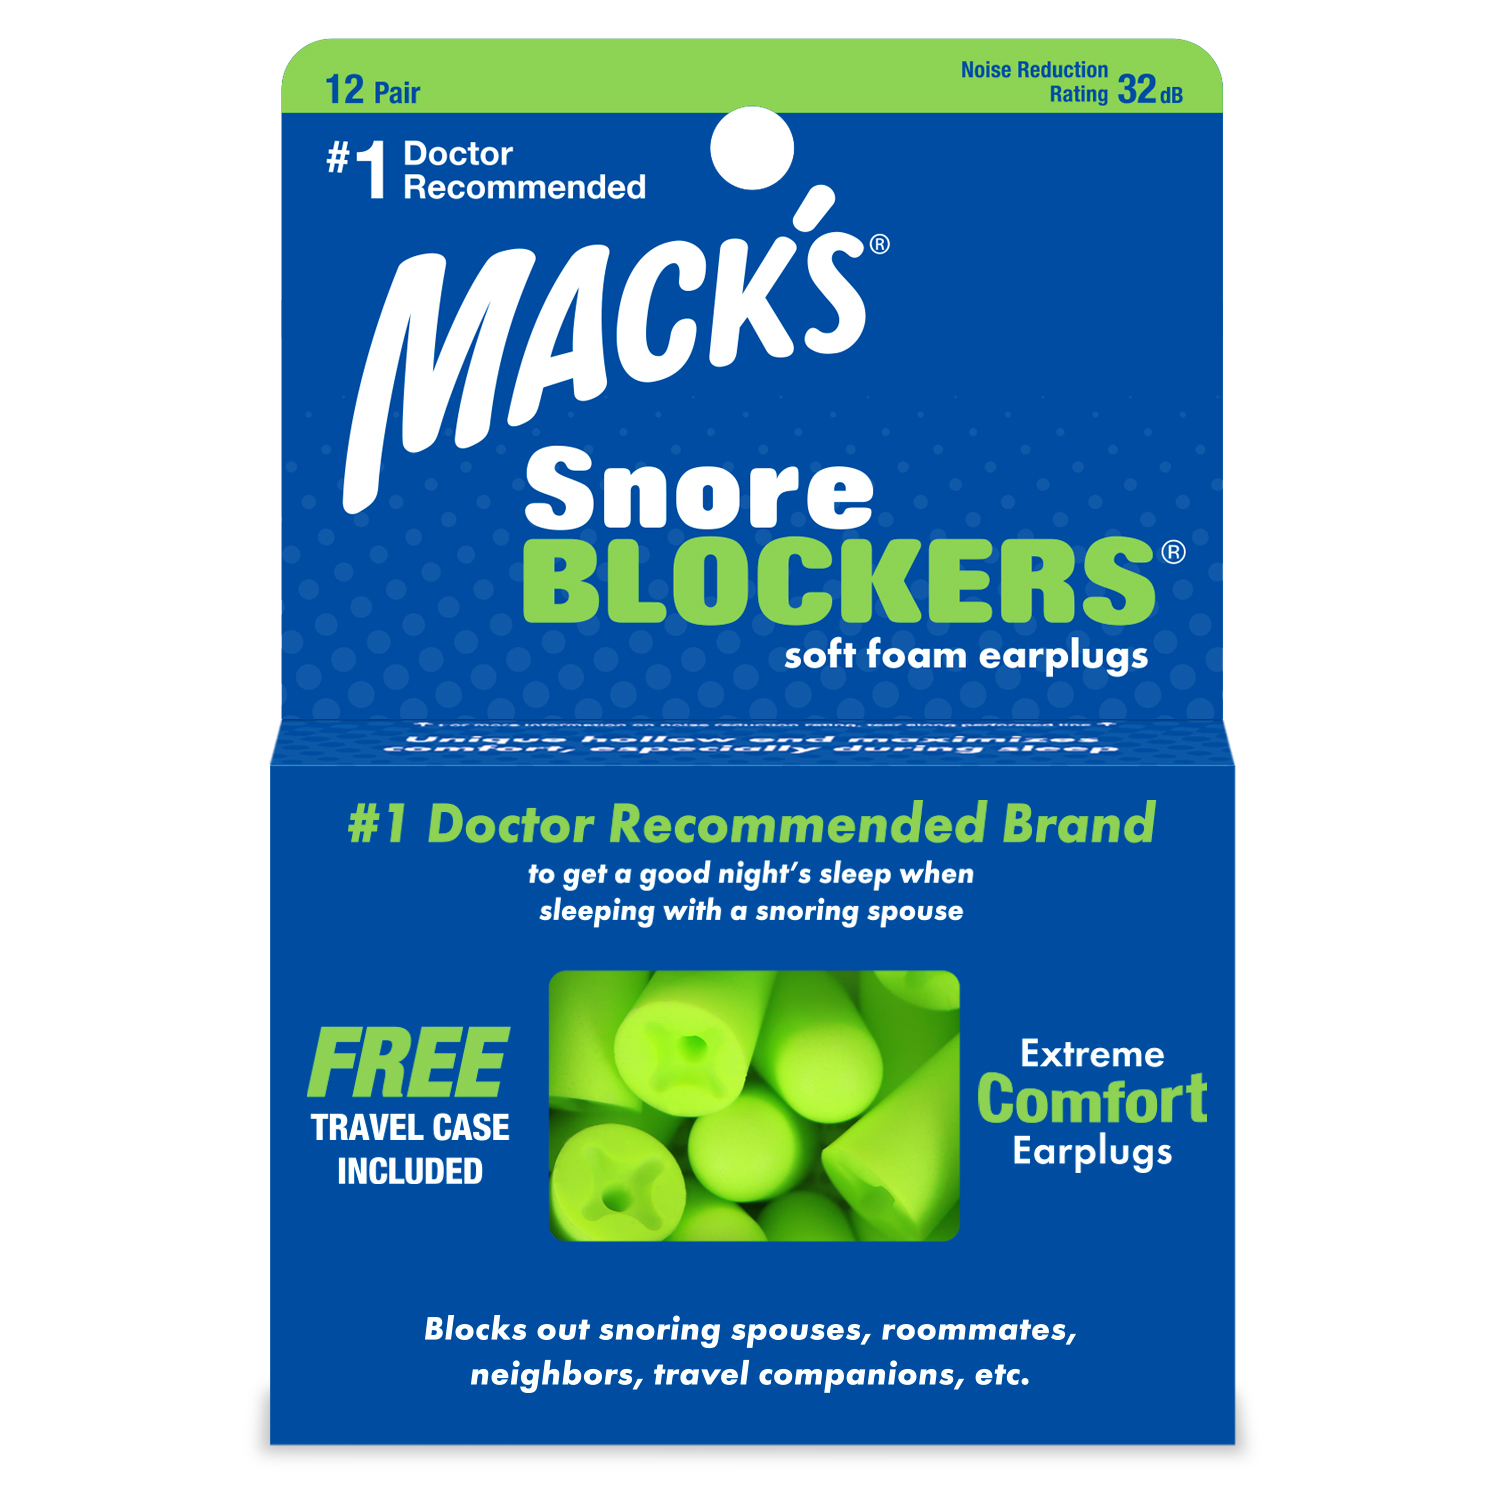 macks earplugs snore blockers are snoring ear plugs to help with sleeping ear plugs anti snoring device snore stopper snoring spouse noise reducing noise cancelling hearing protection and are reusable soft foam ear plugs